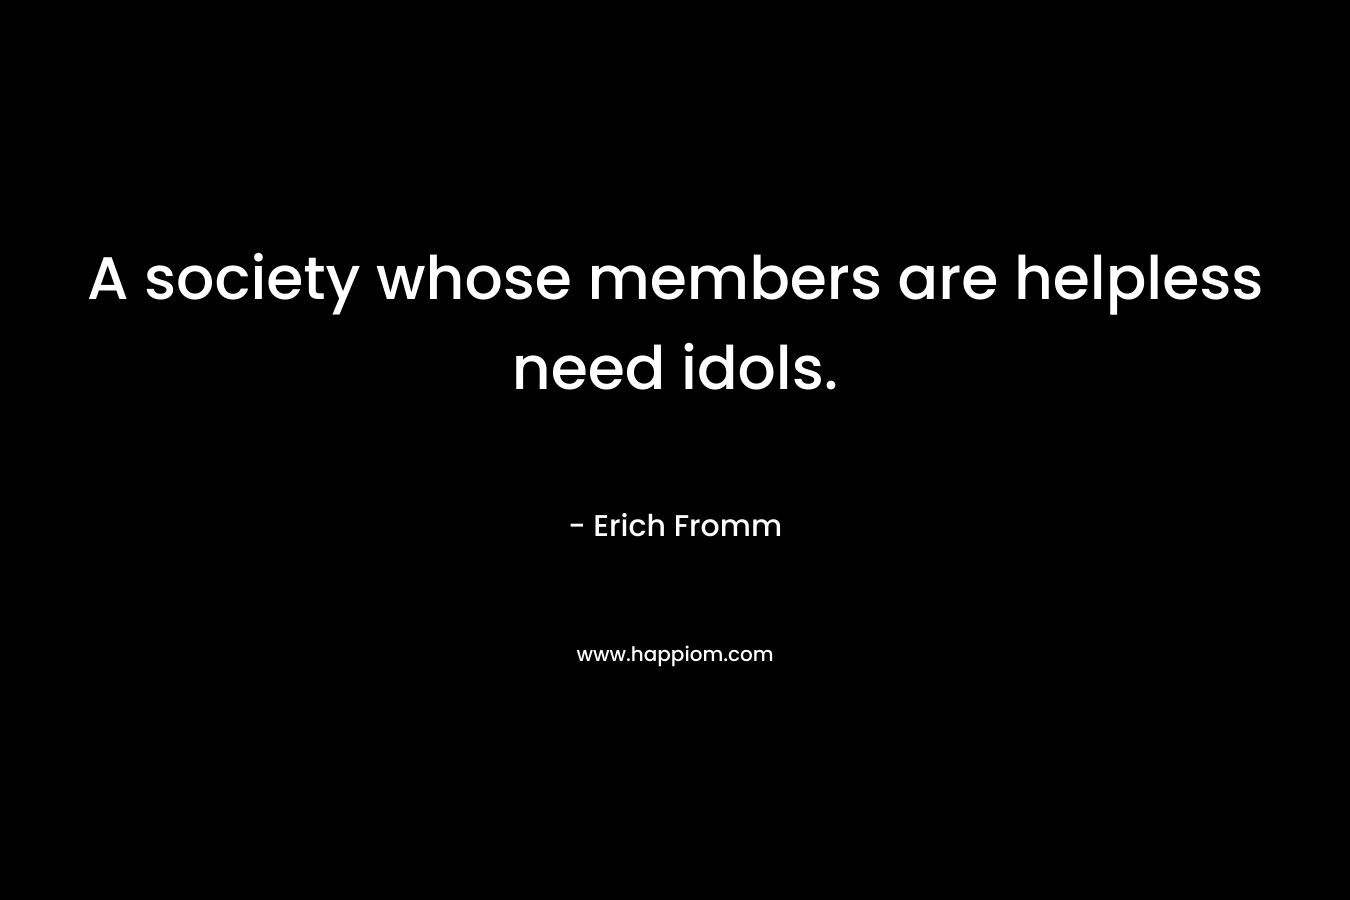 A society whose members are helpless need idols. – Erich Fromm